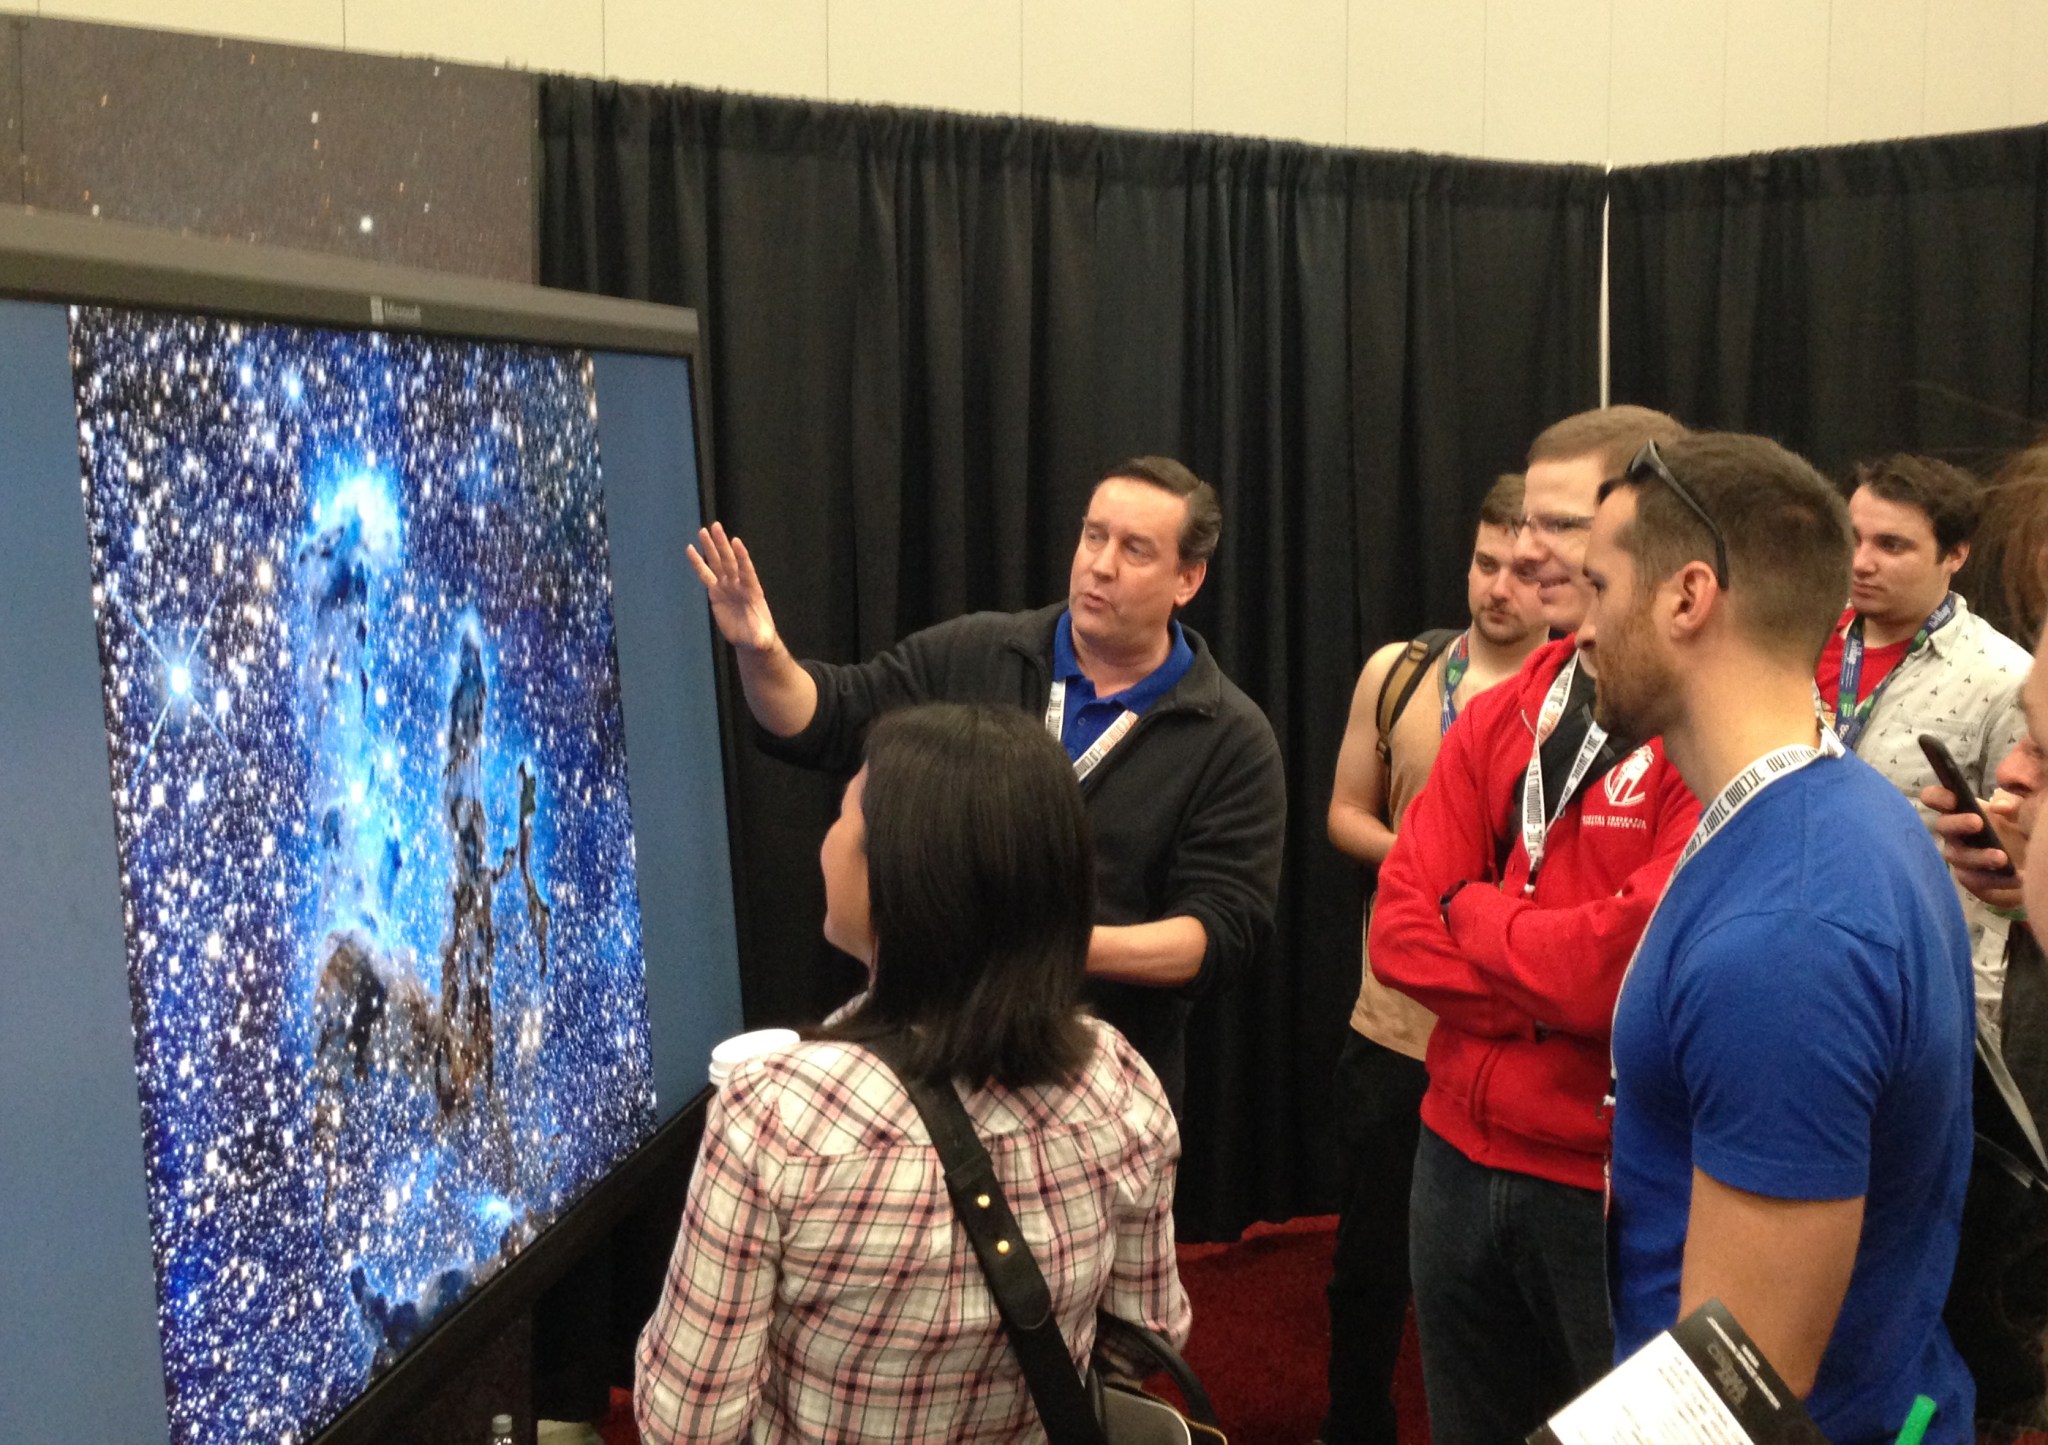 Visitors listen to an explanation of how the Webb telescope will see the famous Eagle Nebula in infrared light at the NASA Booth